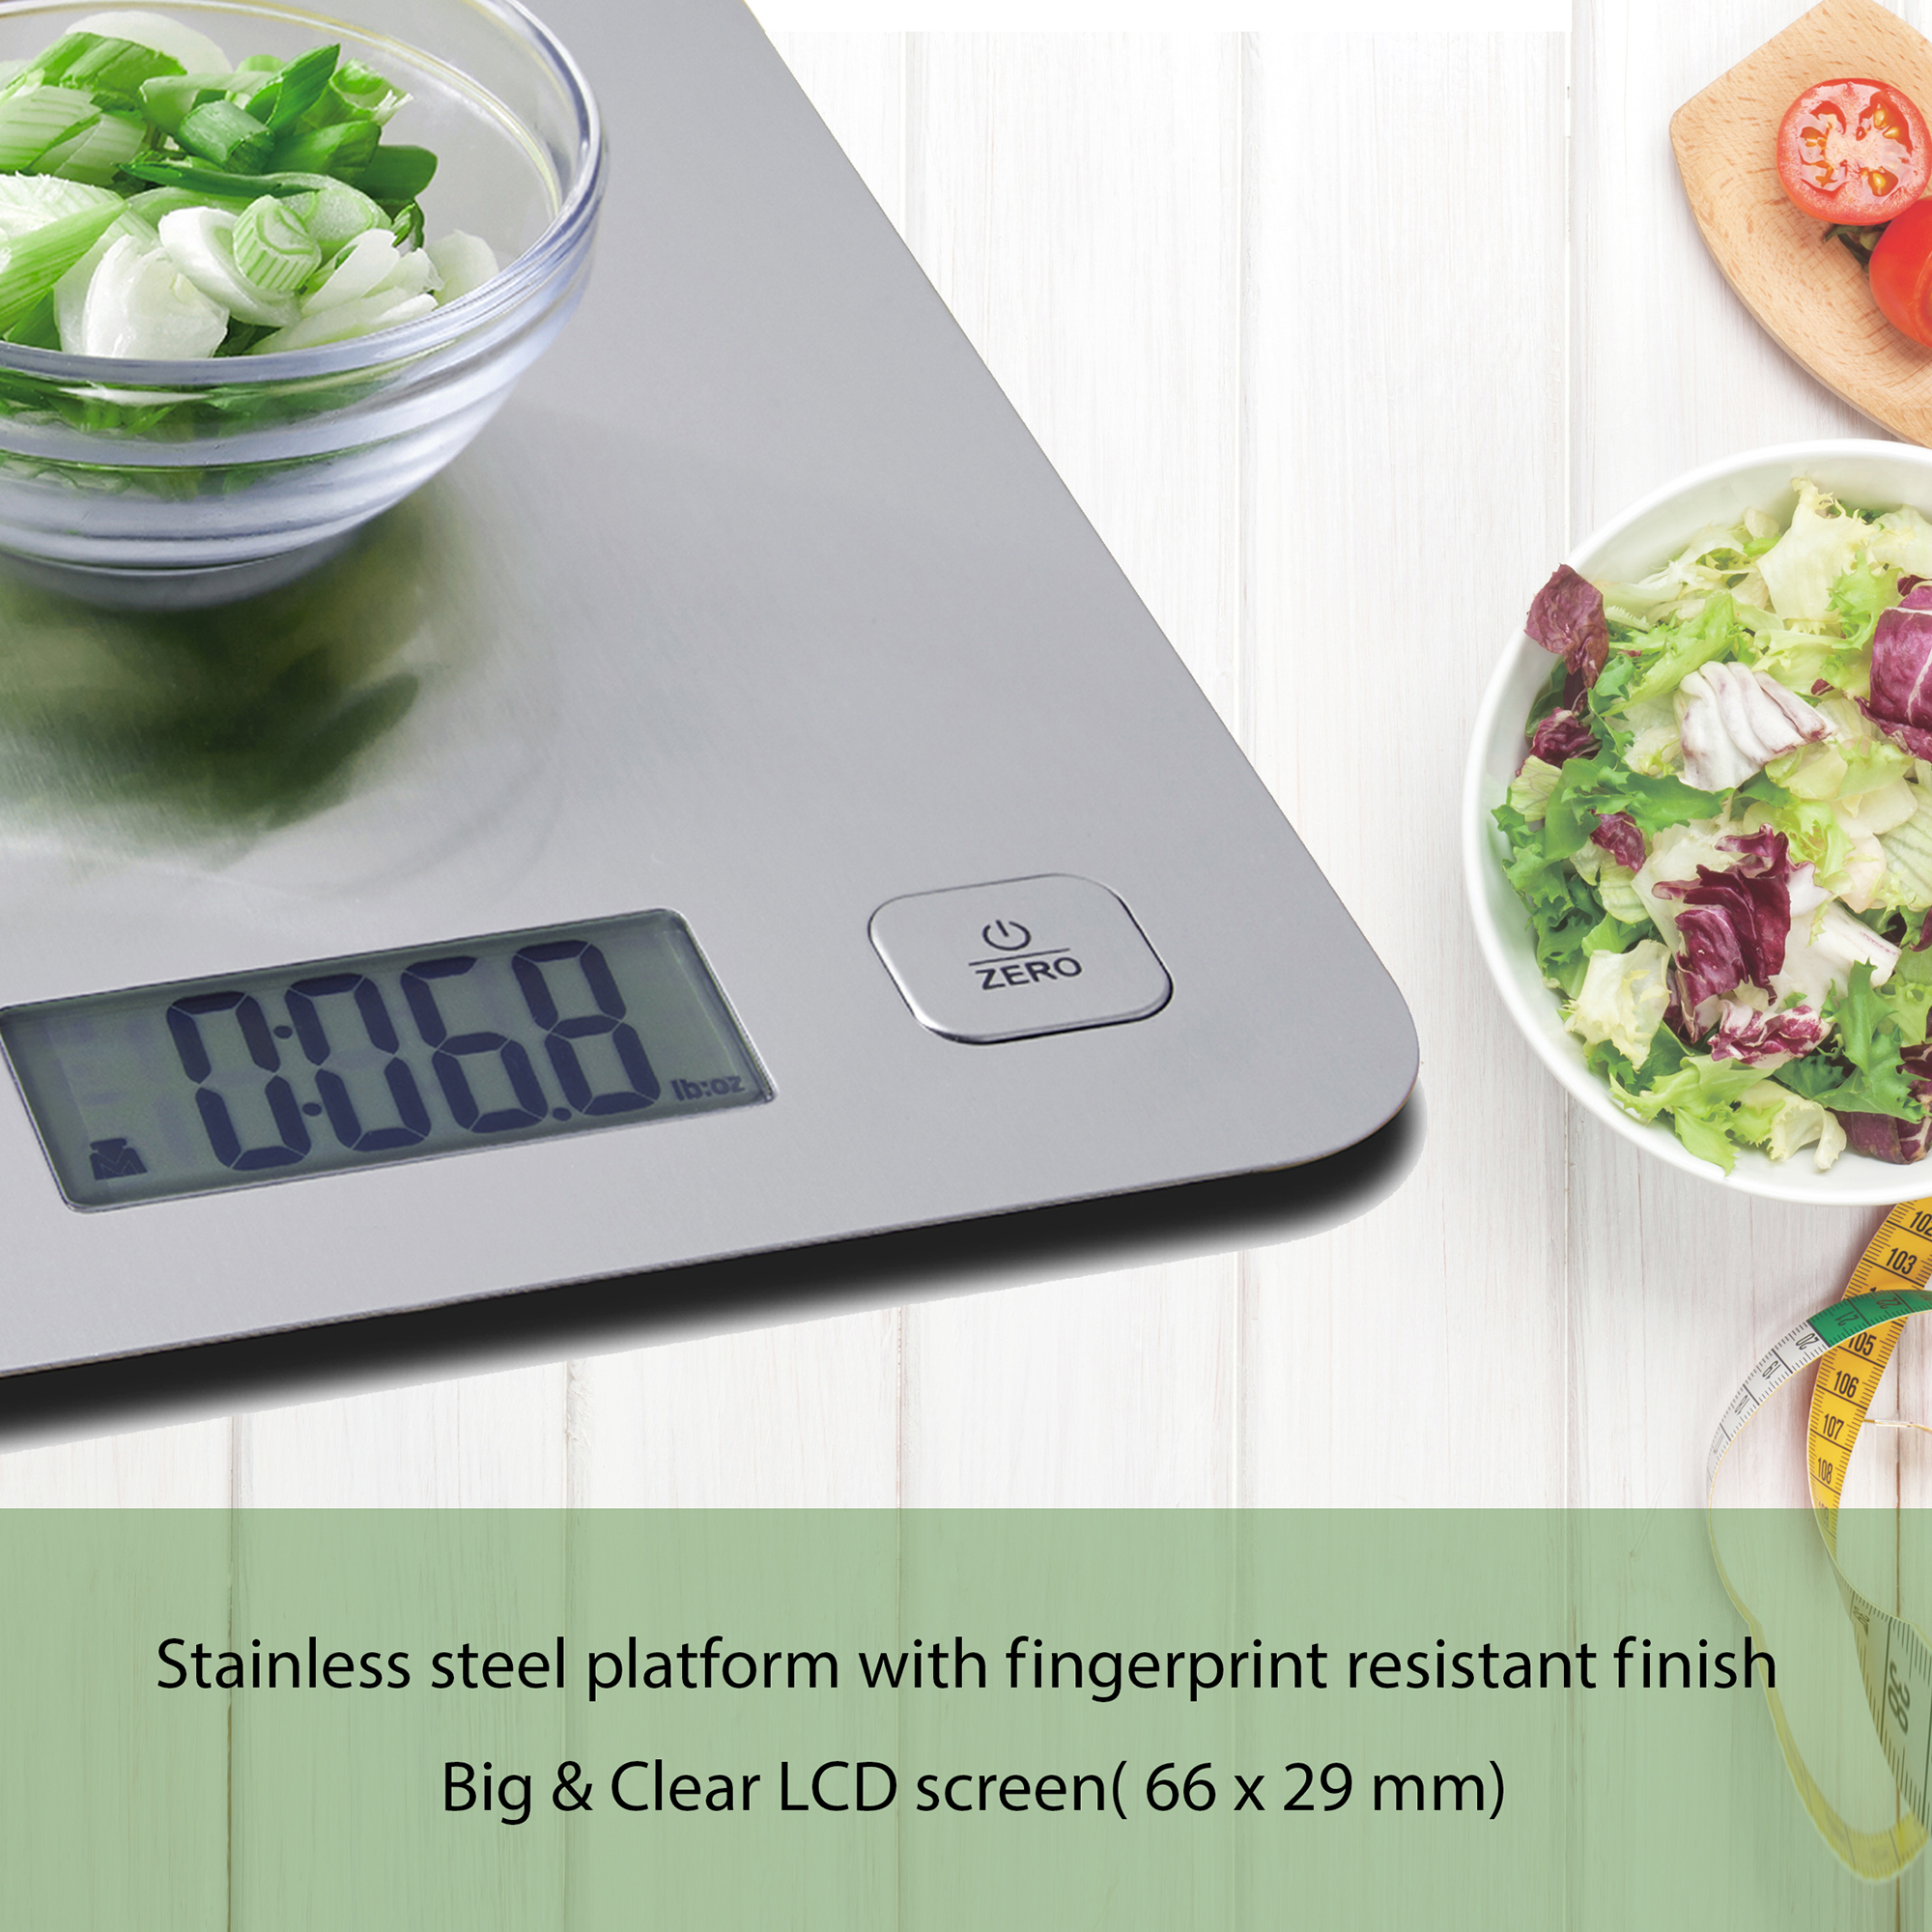 Mainstays Stainless Steel Digital Kitchen Scale, Silver - image 5 of 11